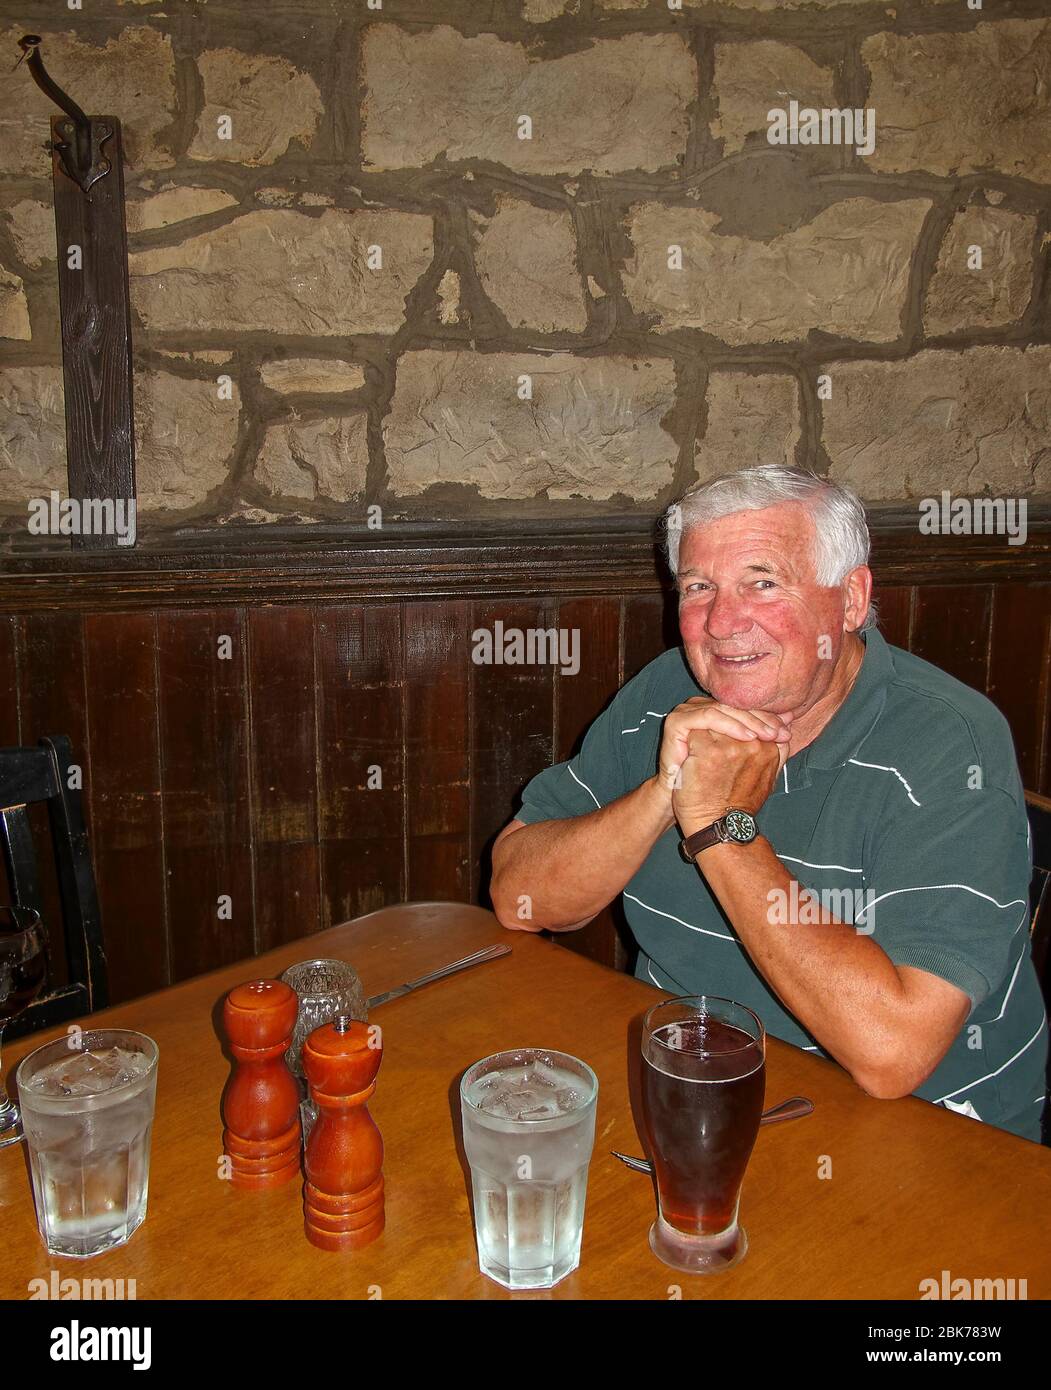 senior man, sitting at table, restaurant, hands under chin, smiling, happy, beer, water, large salt and pepper shakers, dark wood wainscoting, stone w Stock Photo